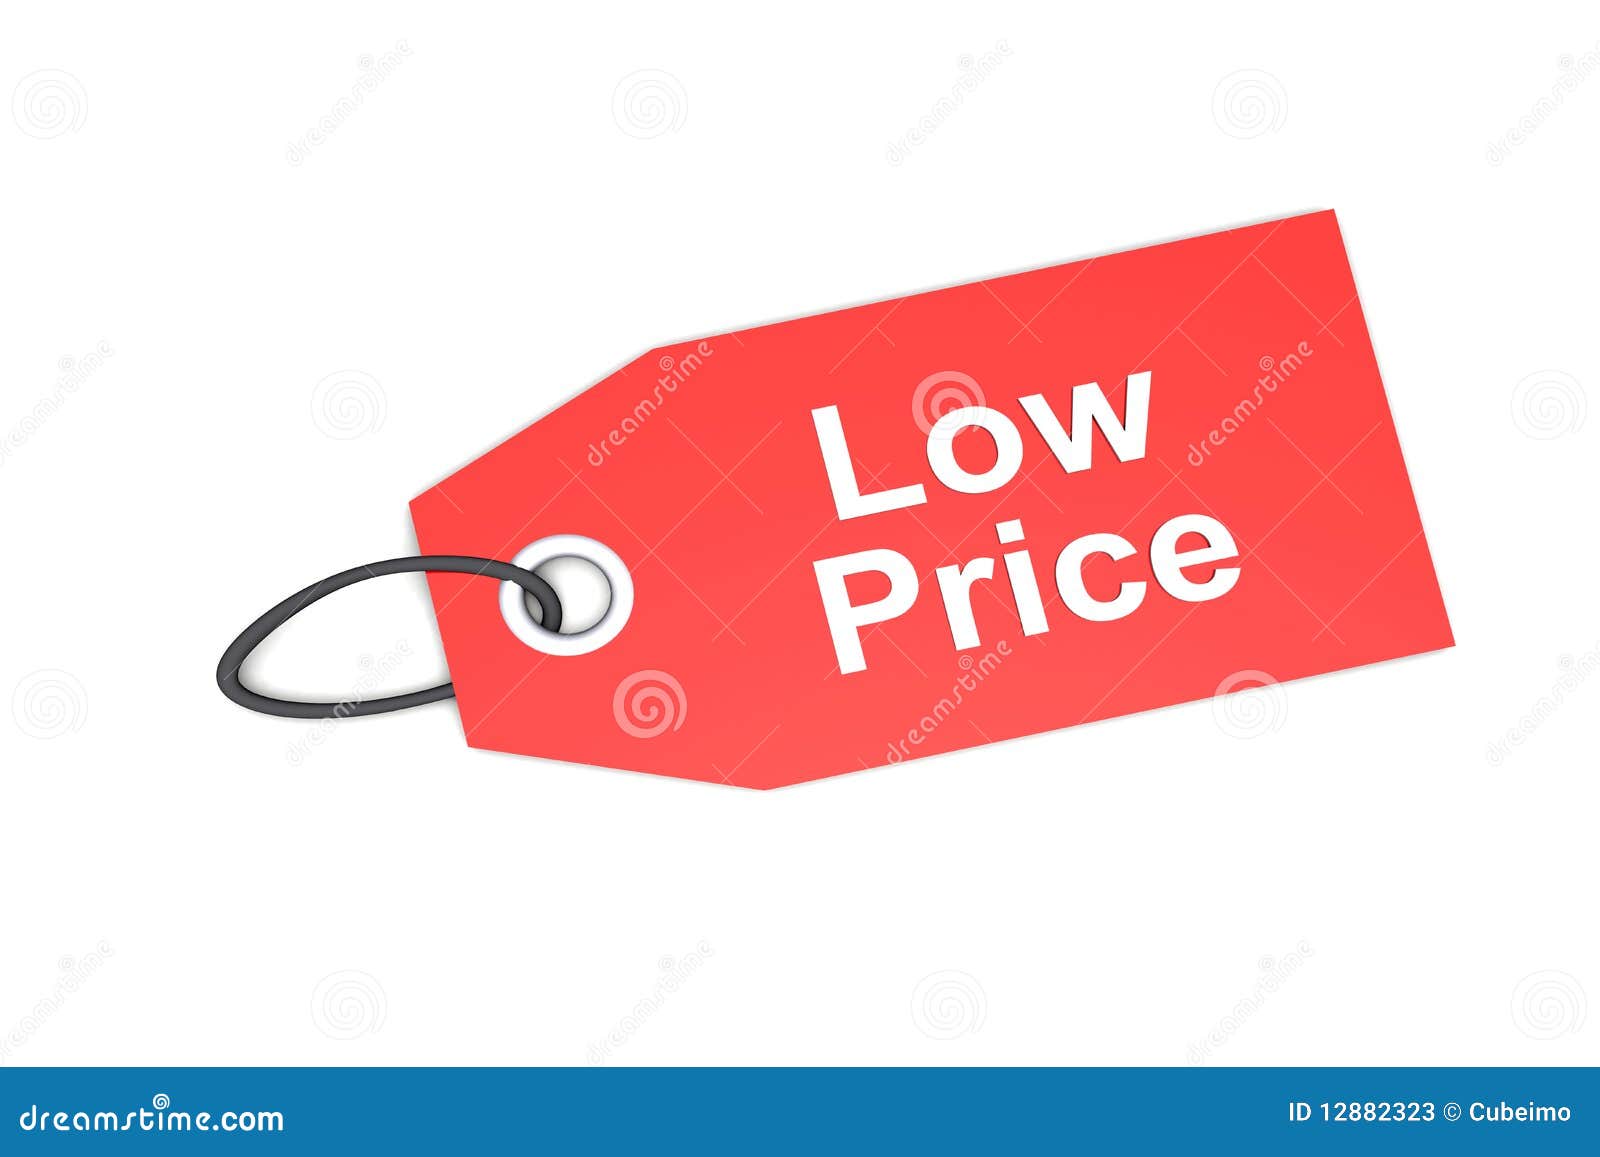 tag with low price